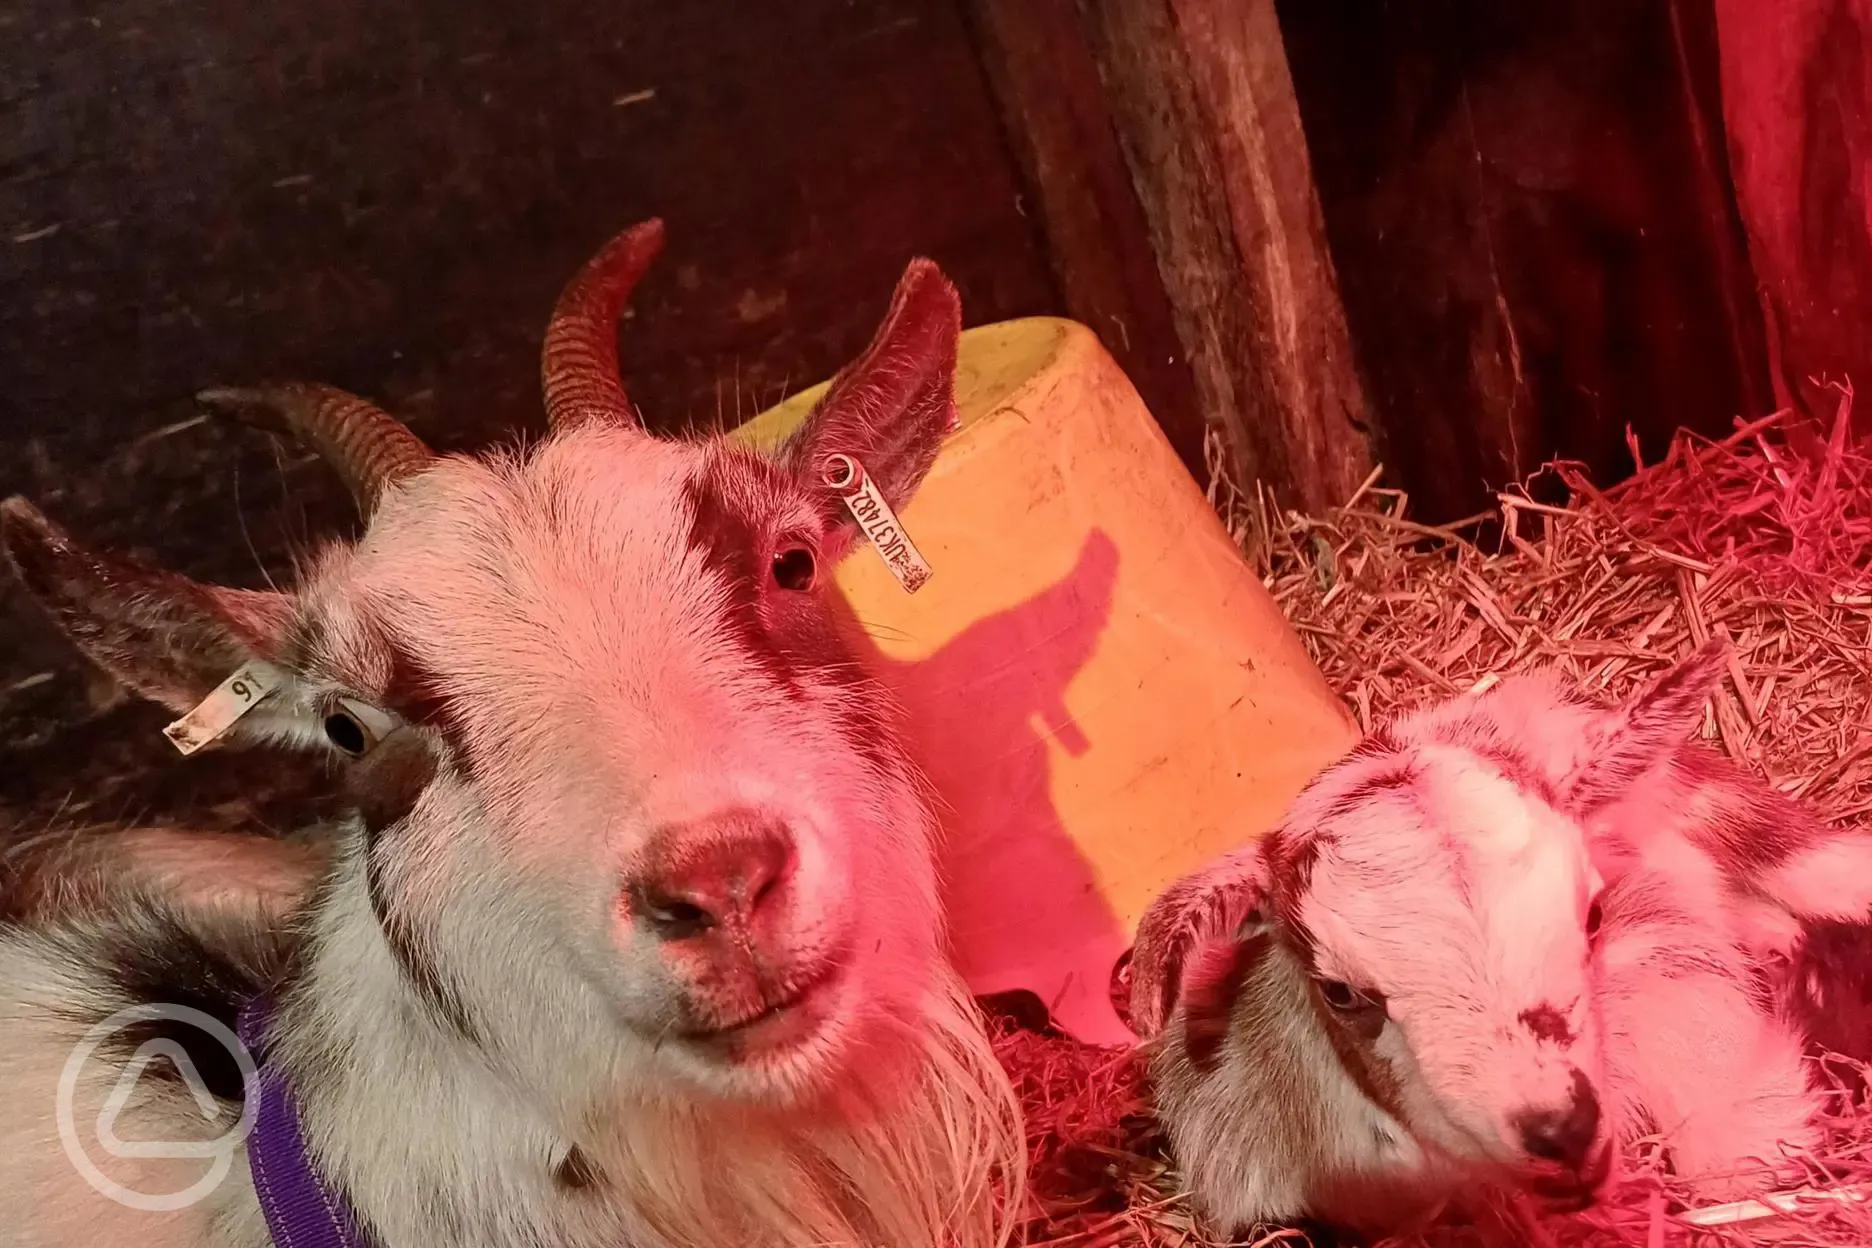 Our Nanny goat Flute and her baby Splodge